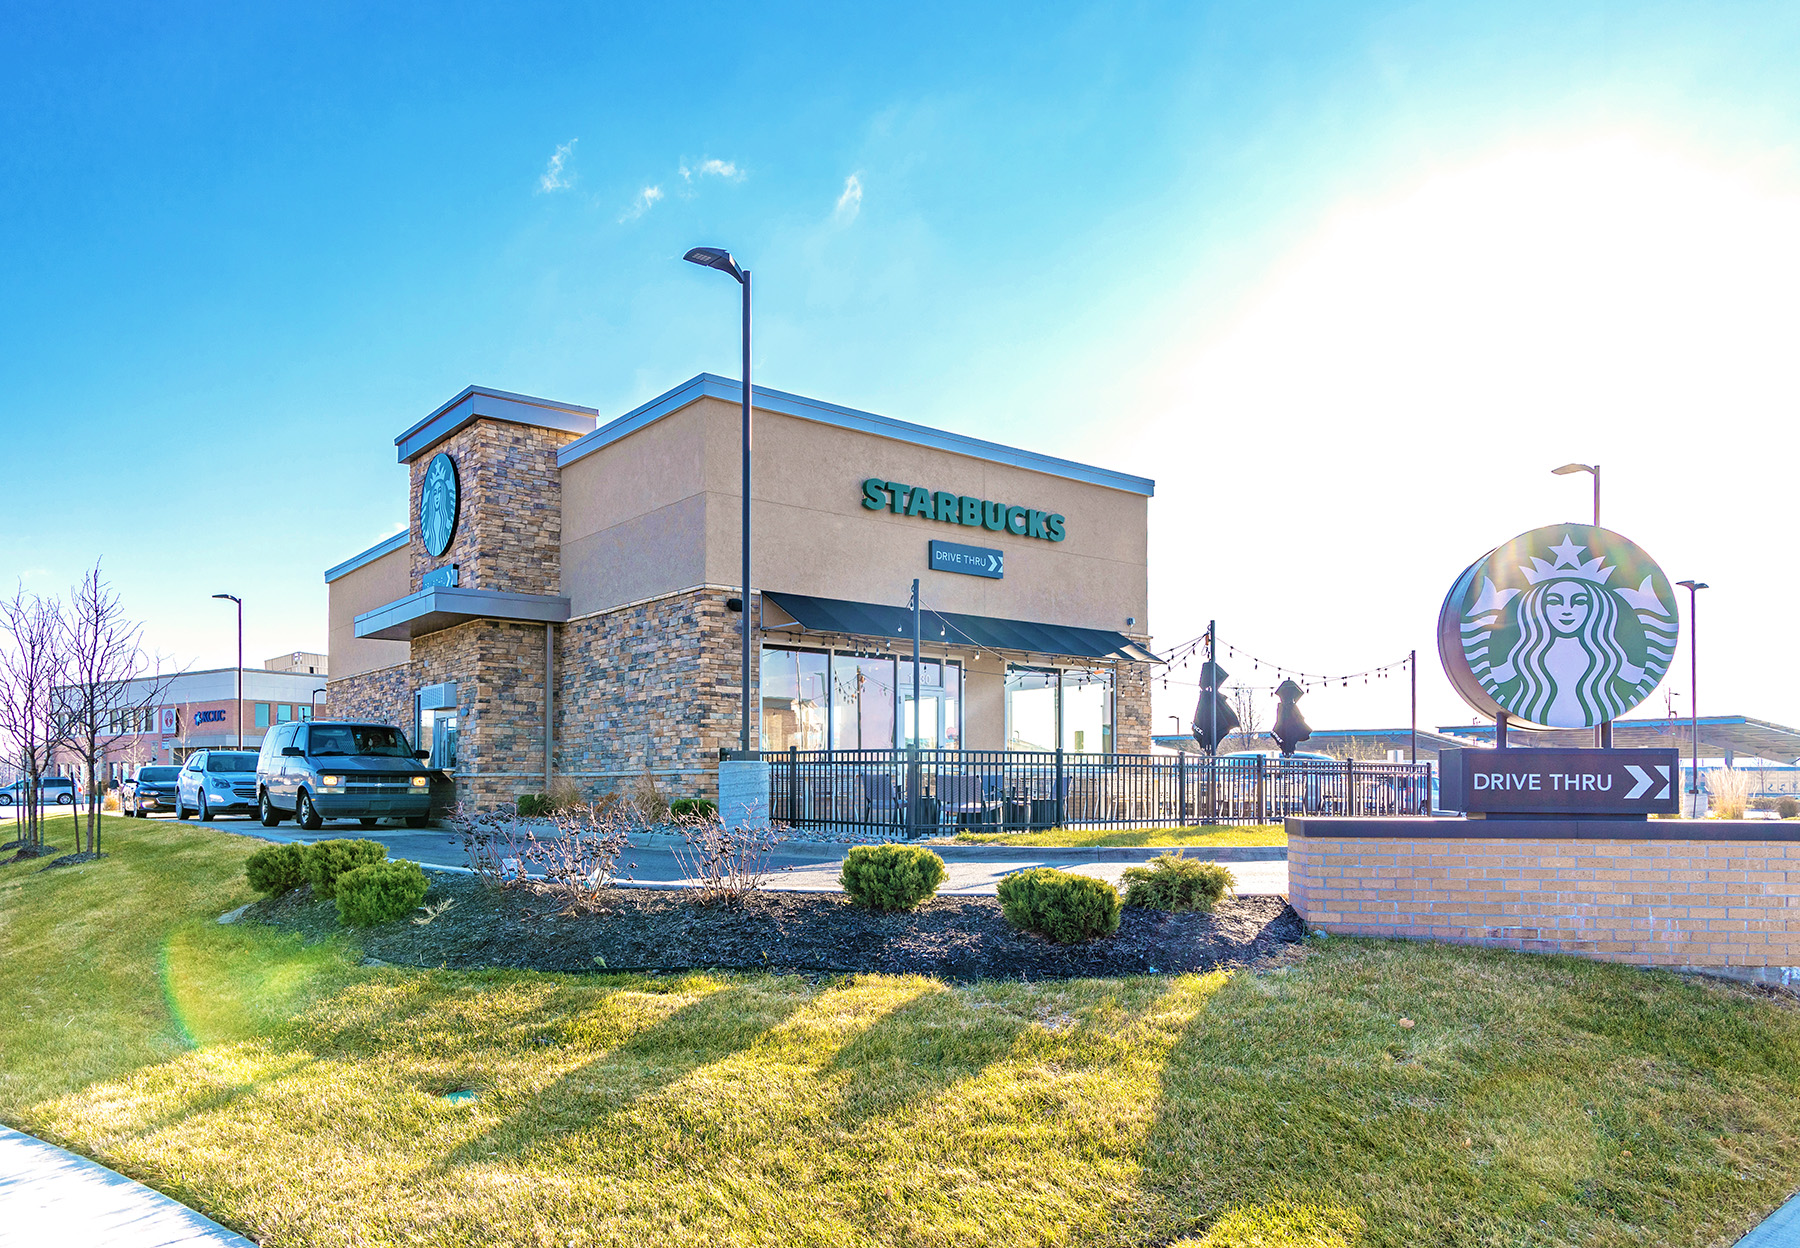 Hanley Investment Group Arranges Sale of New Construction Starbucks Drive-Thru in North Kansas City for $2.3 Million